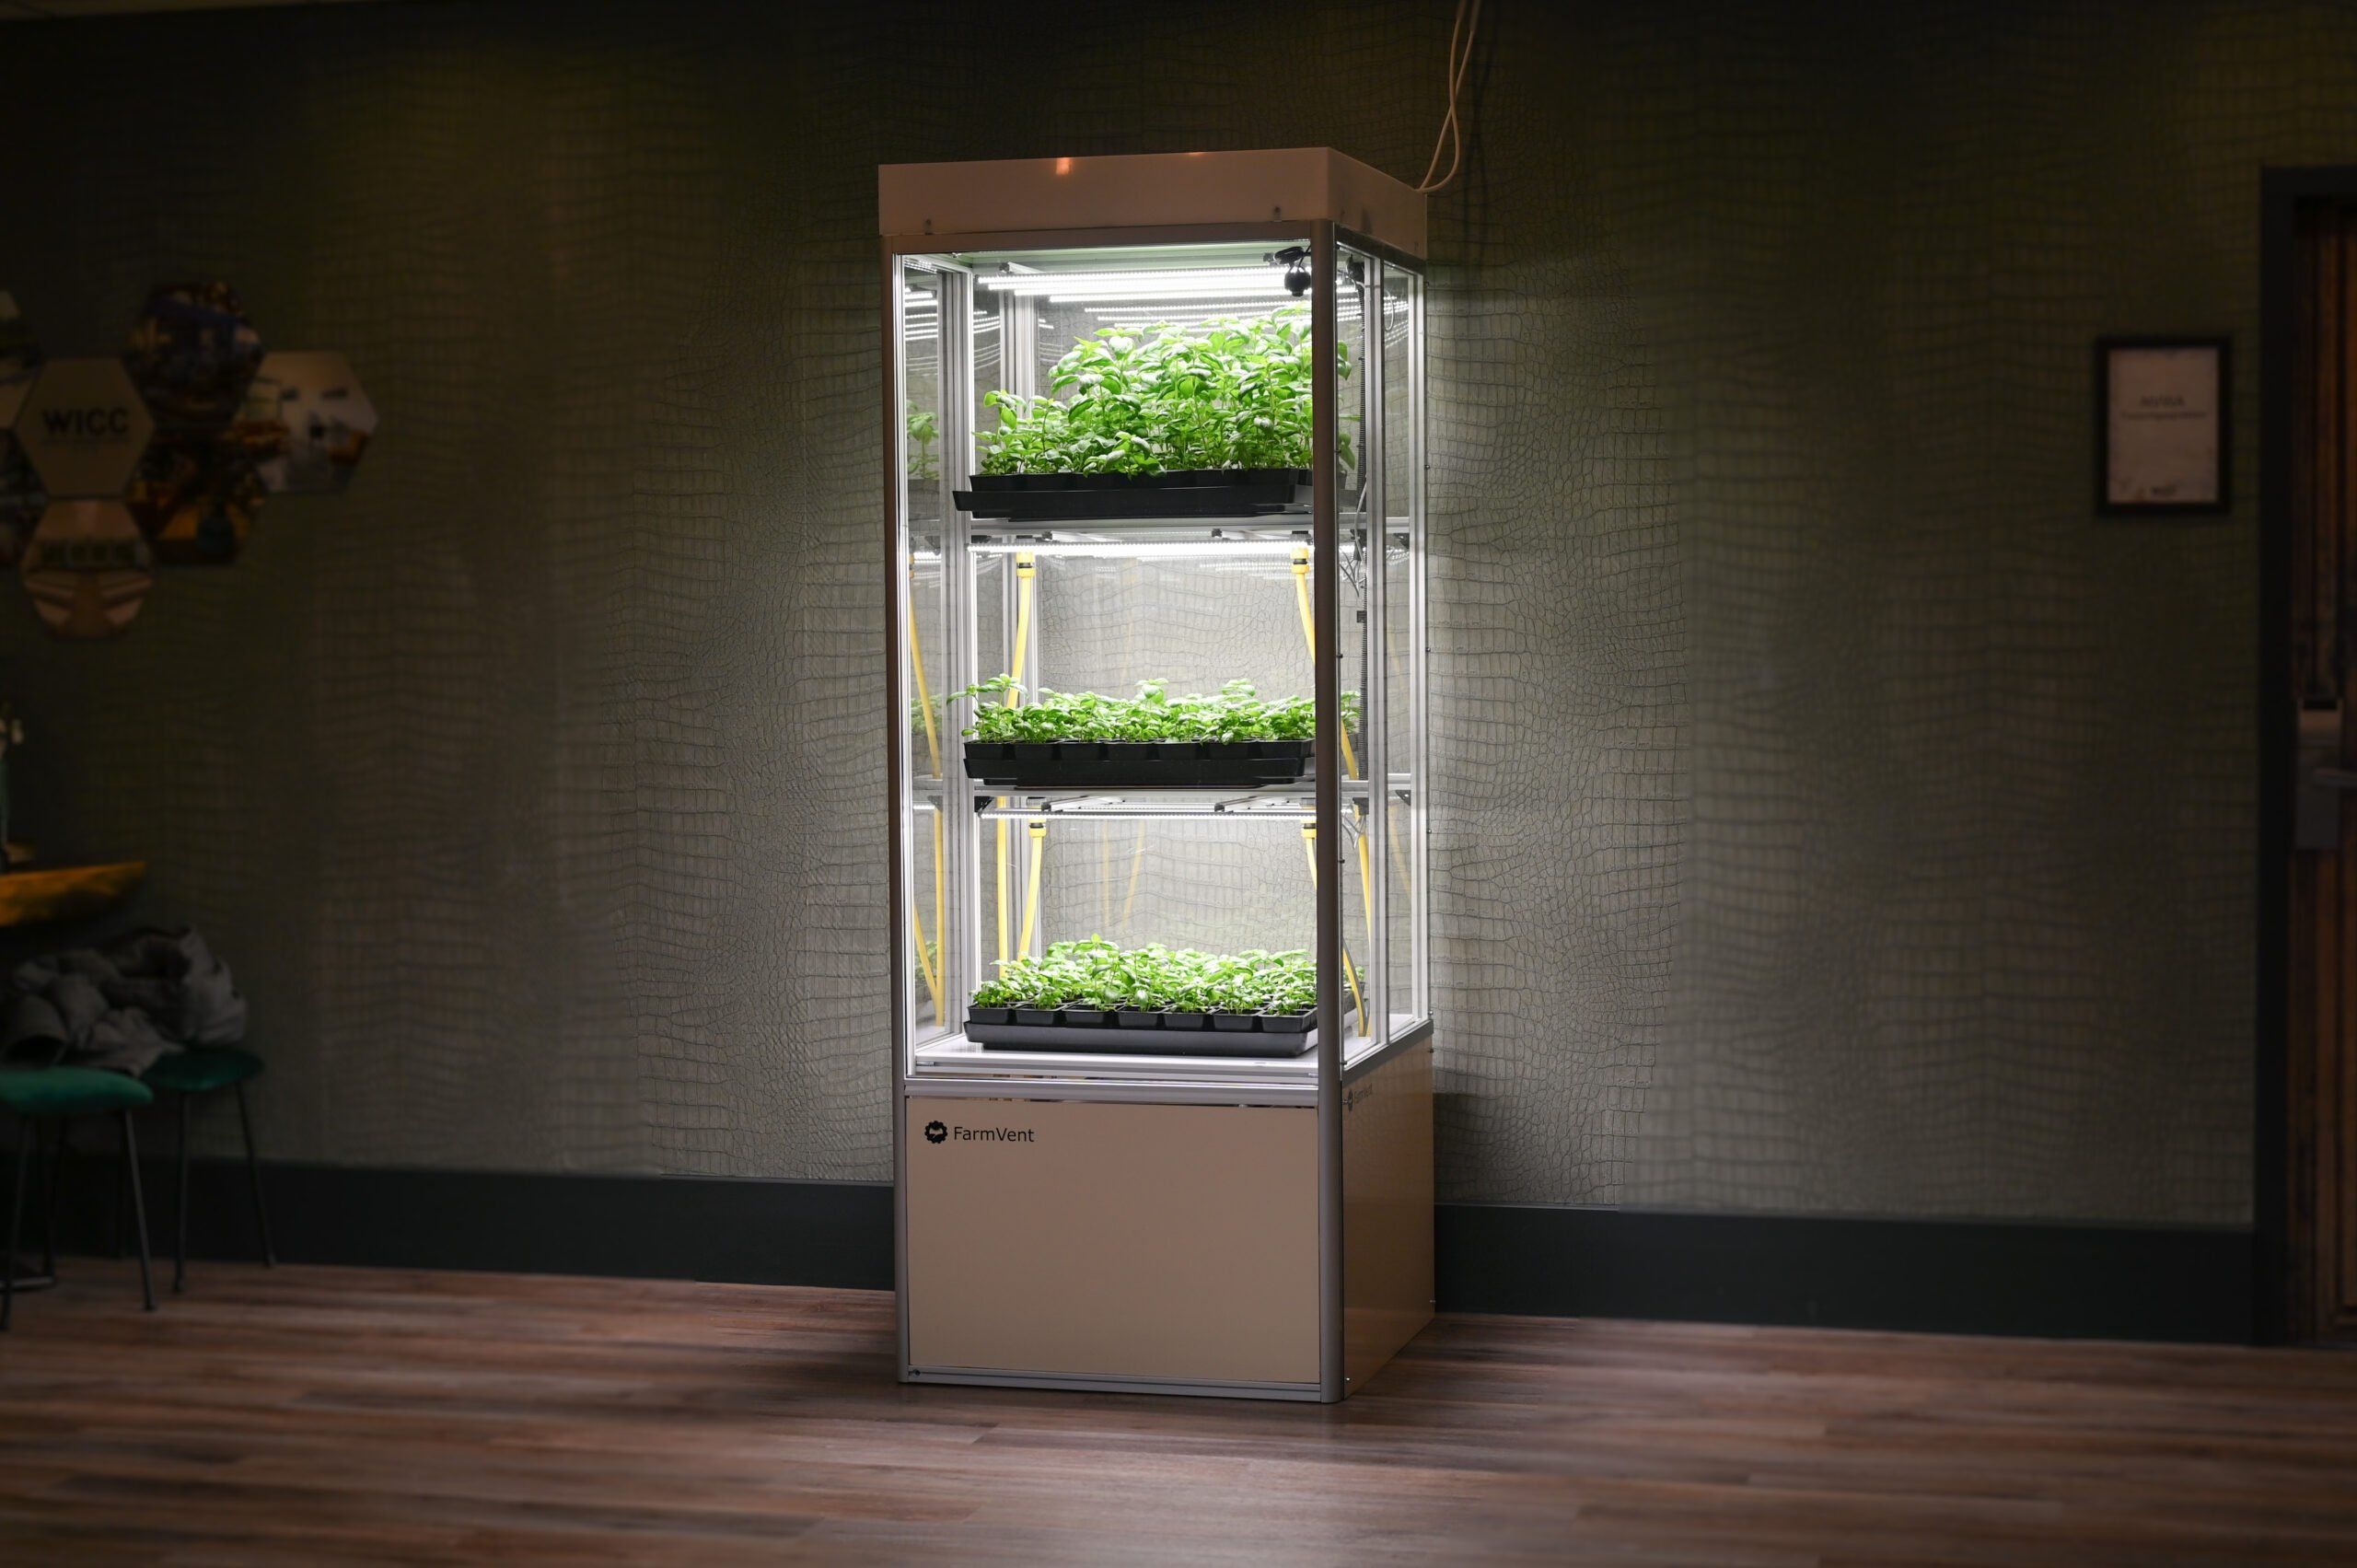 FarmVent brings agriculture indoors with their vertical grow cabinets